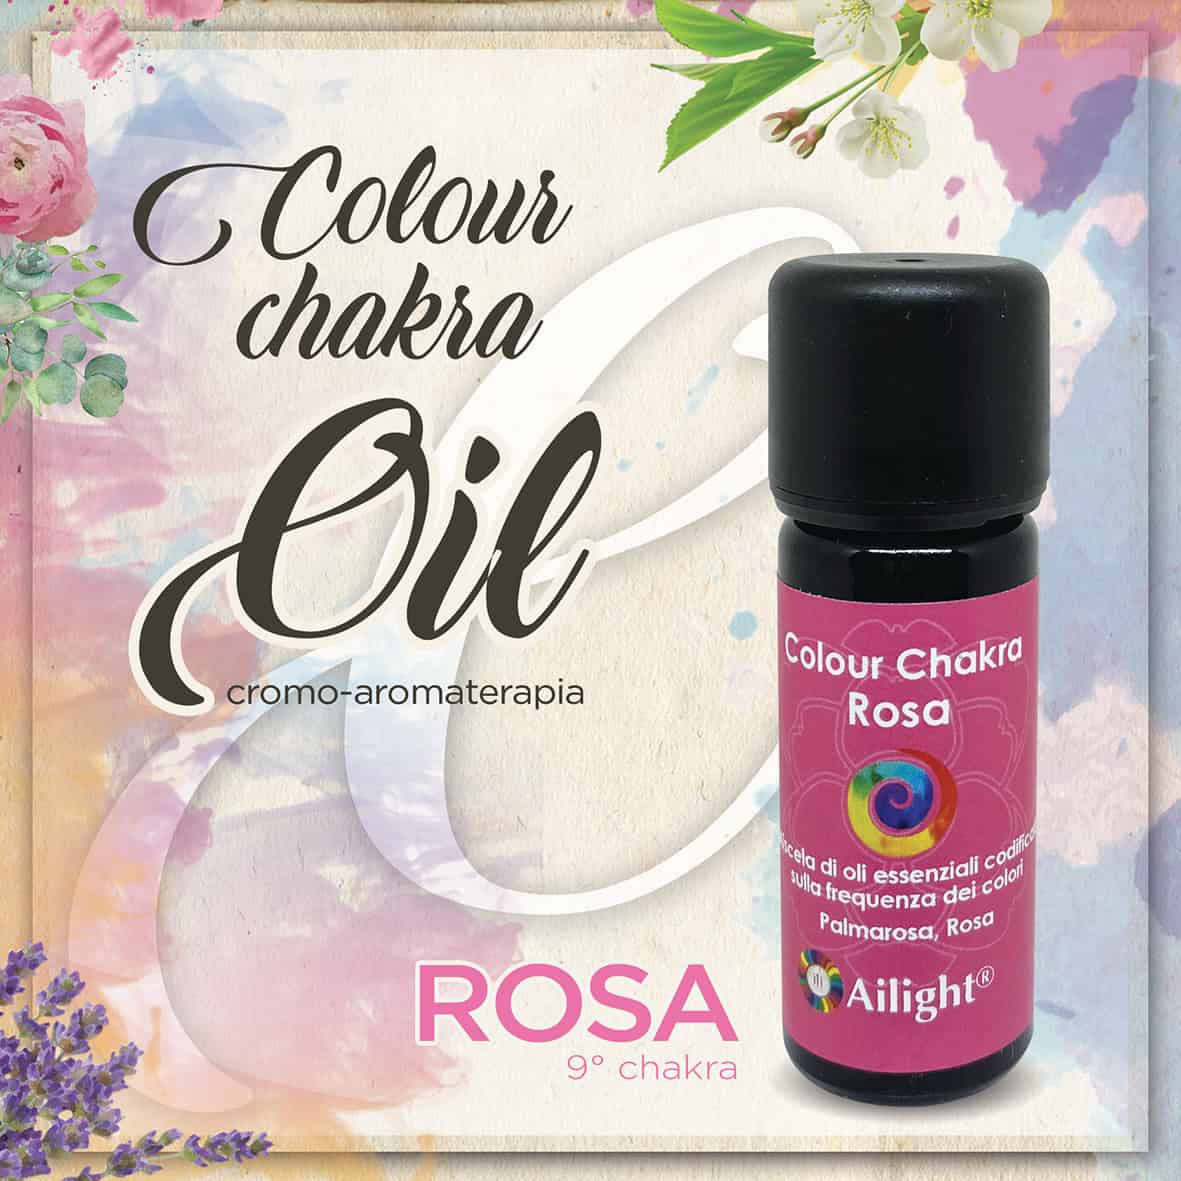 Colour Chakra Pink – HELPS RELEASE ANGER BY PRODUCING A FEELING OF UNITY